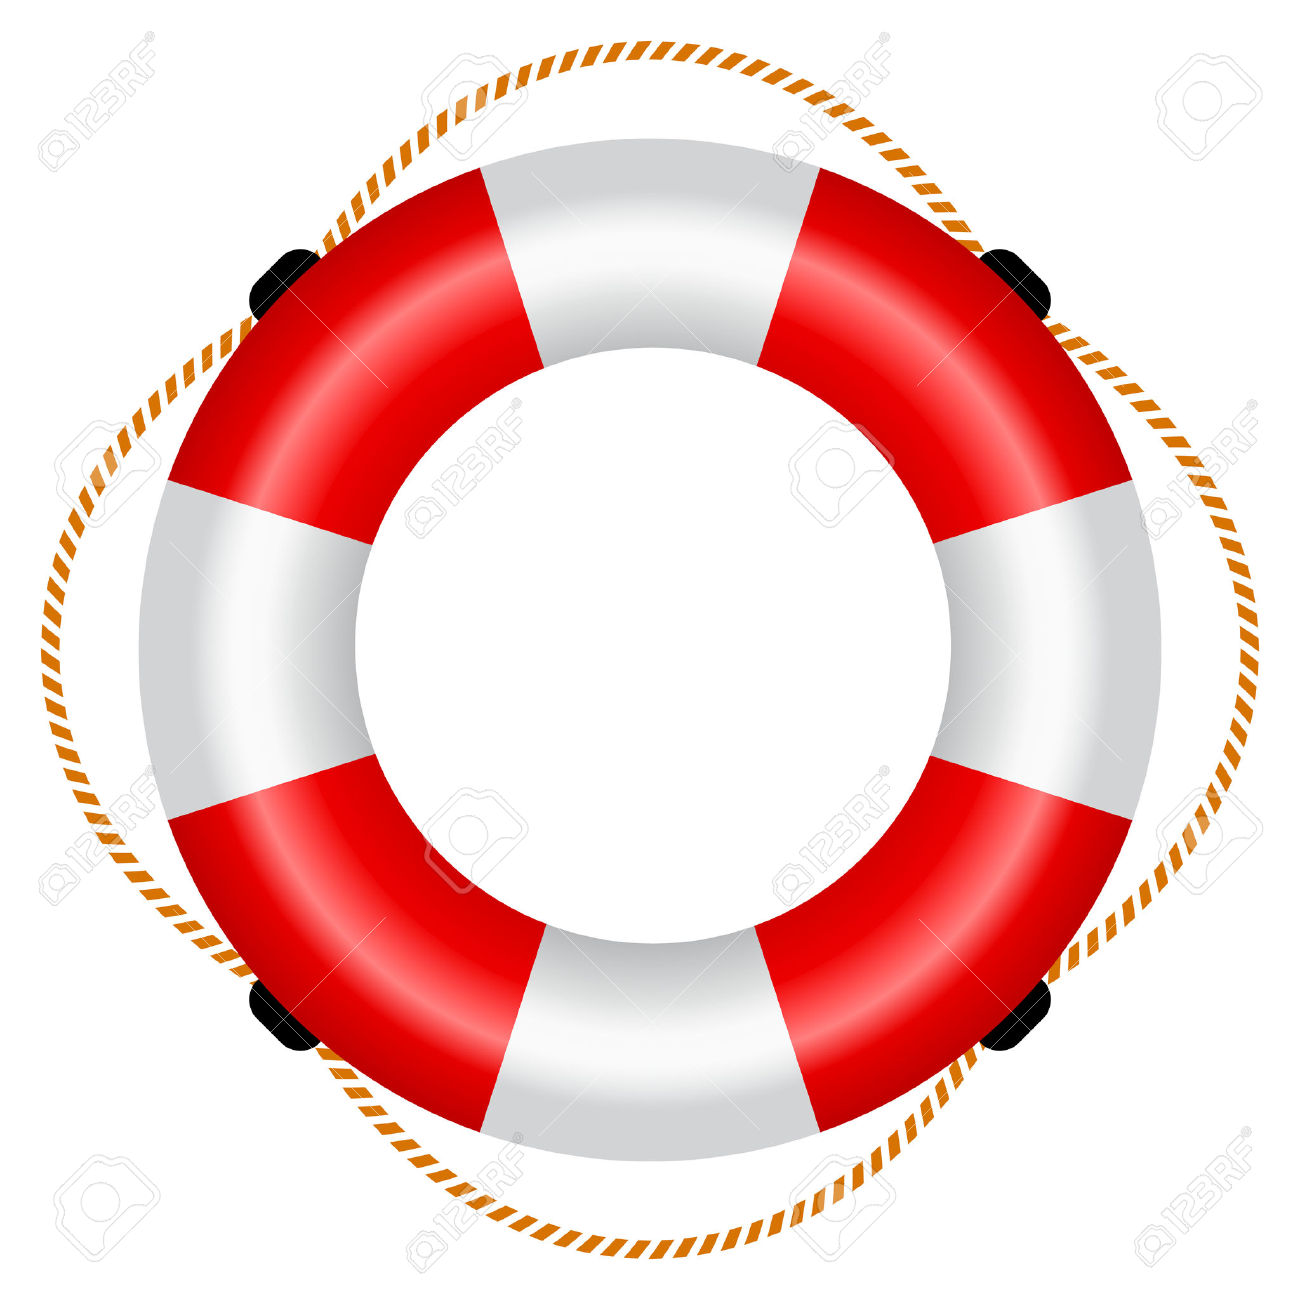 Free download best . Lifeguard clipart life preserver